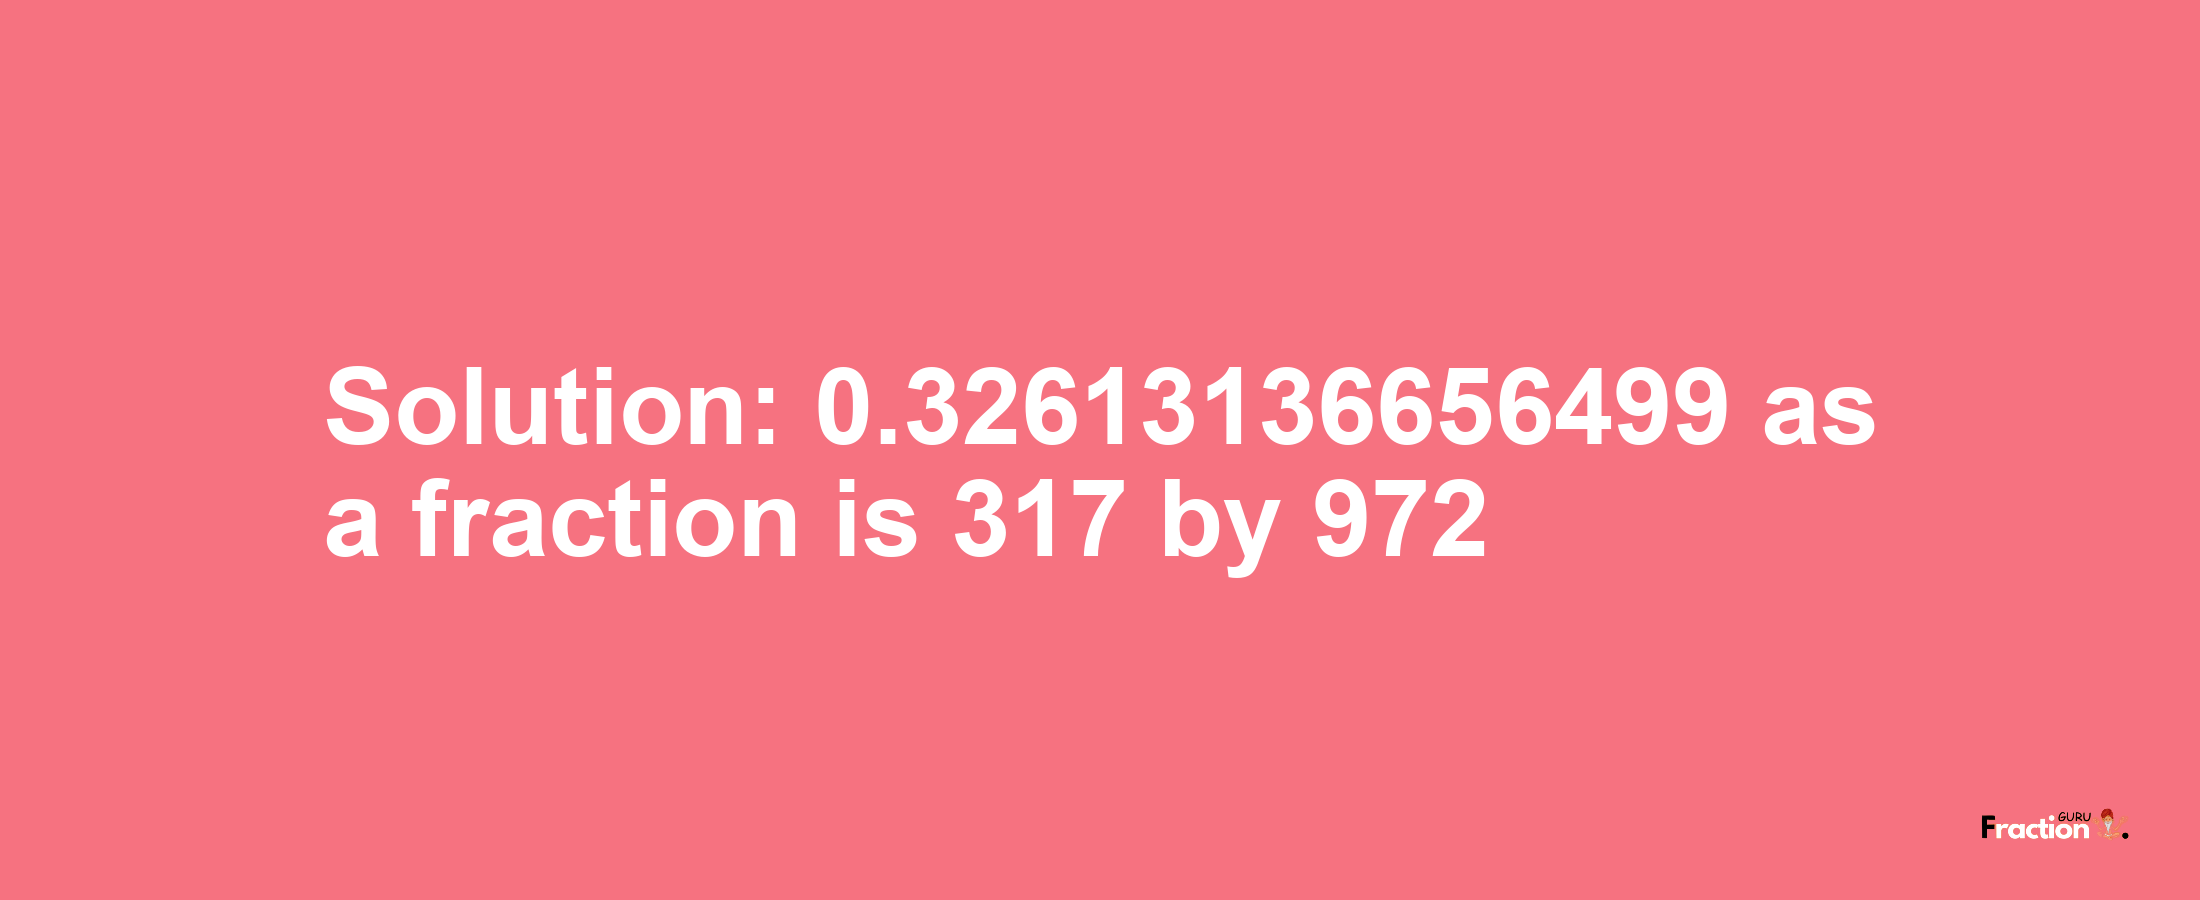 Solution:0.32613136656499 as a fraction is 317/972